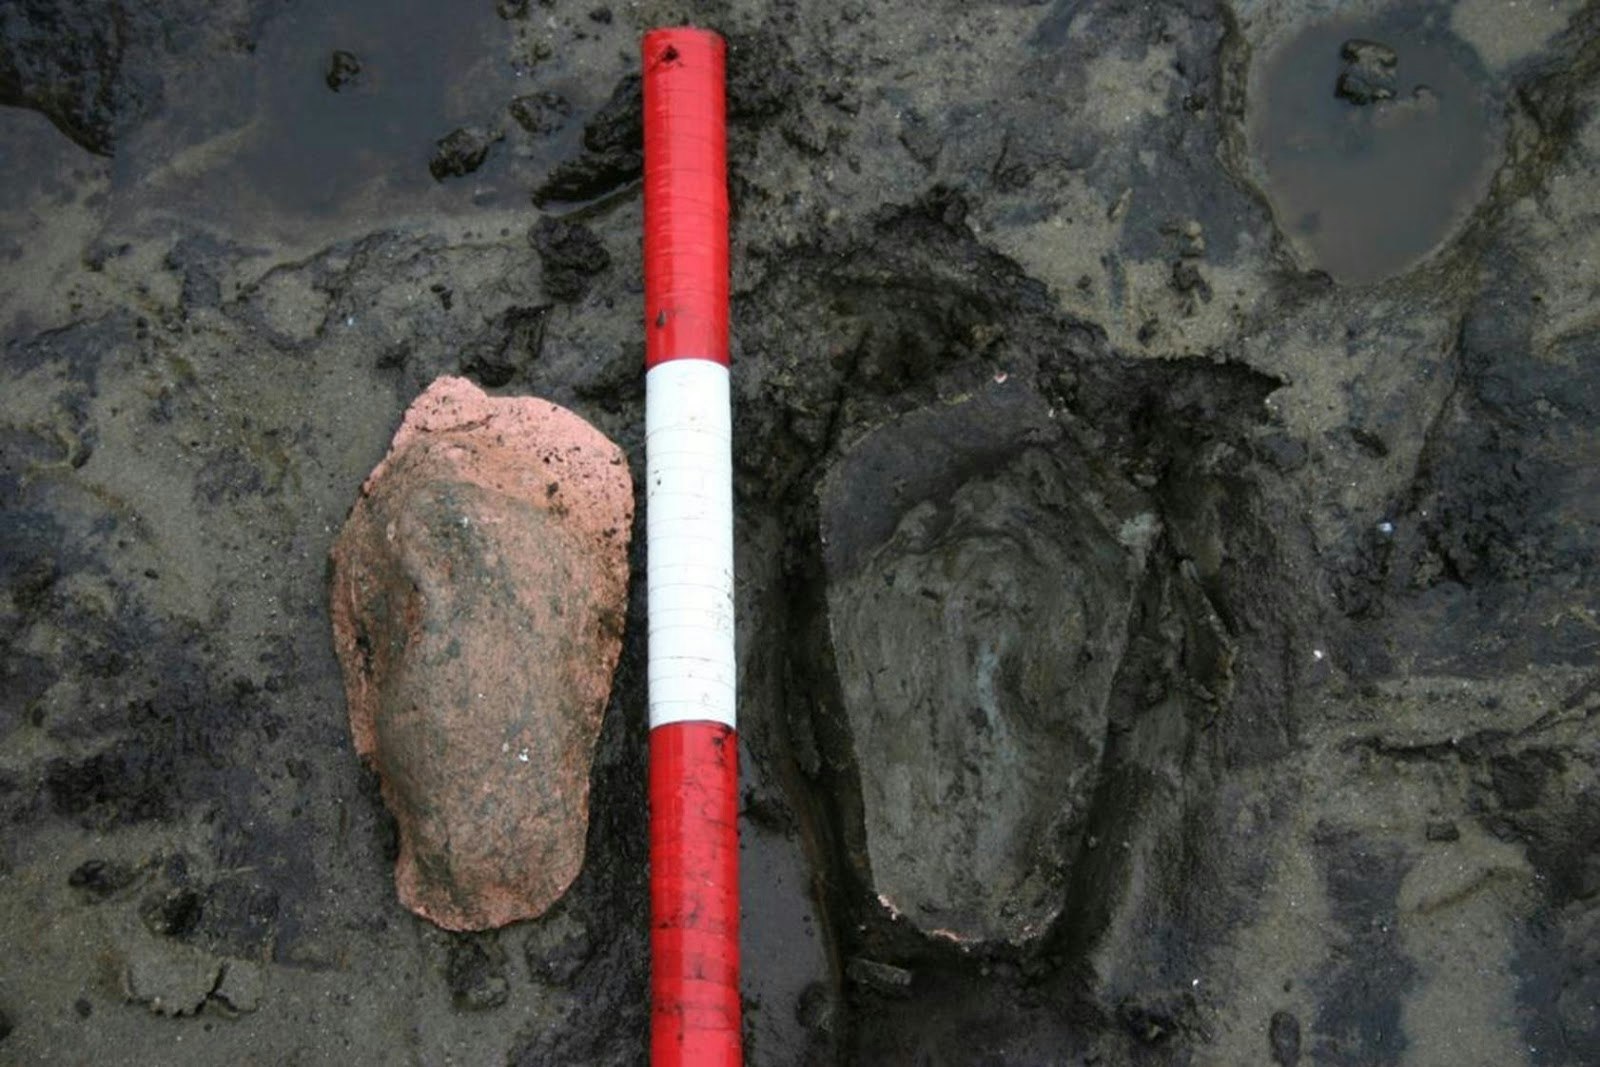 A child's footprint preserved in Bronze Age peat